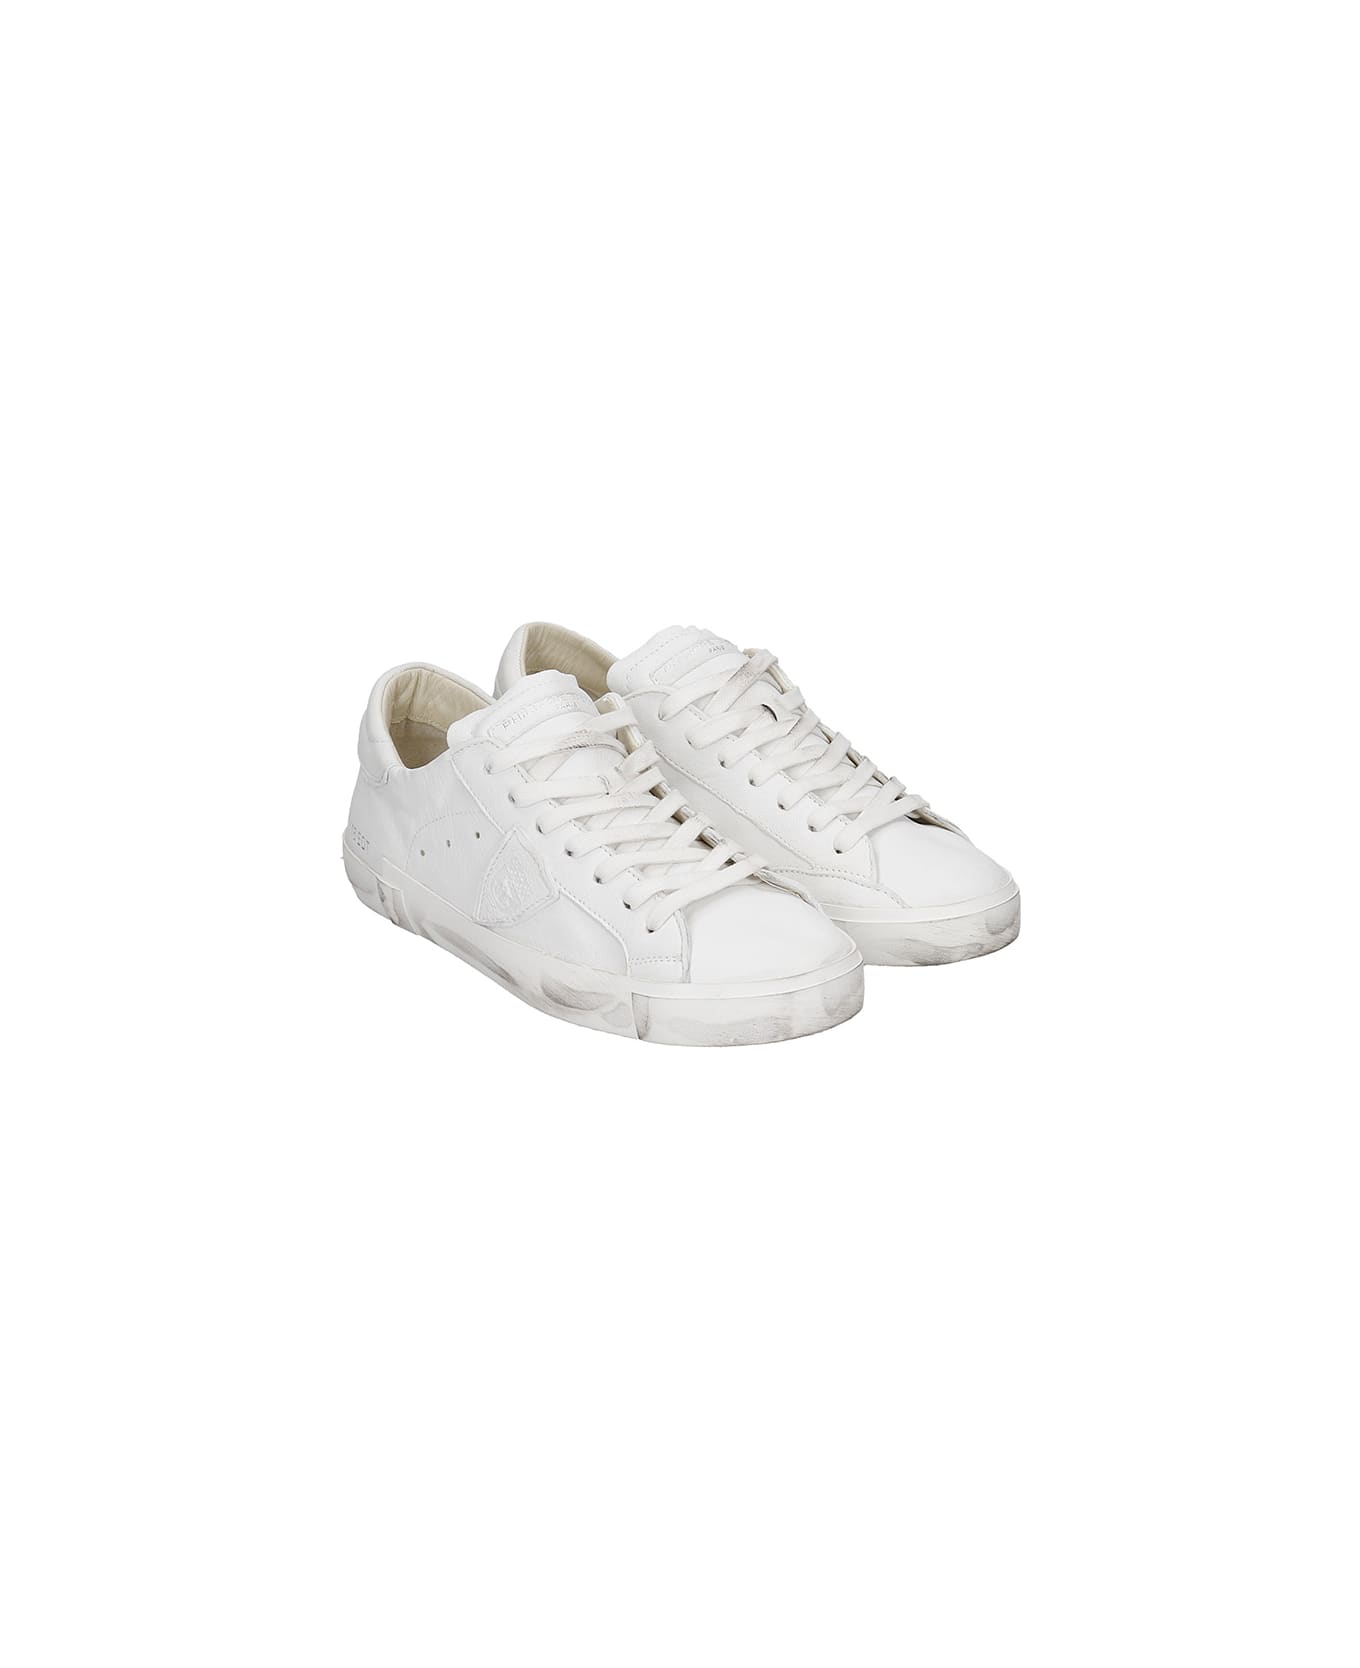 Philippe Model Prsx L Sneakers In White Leather - Basic Blanc スニーカー